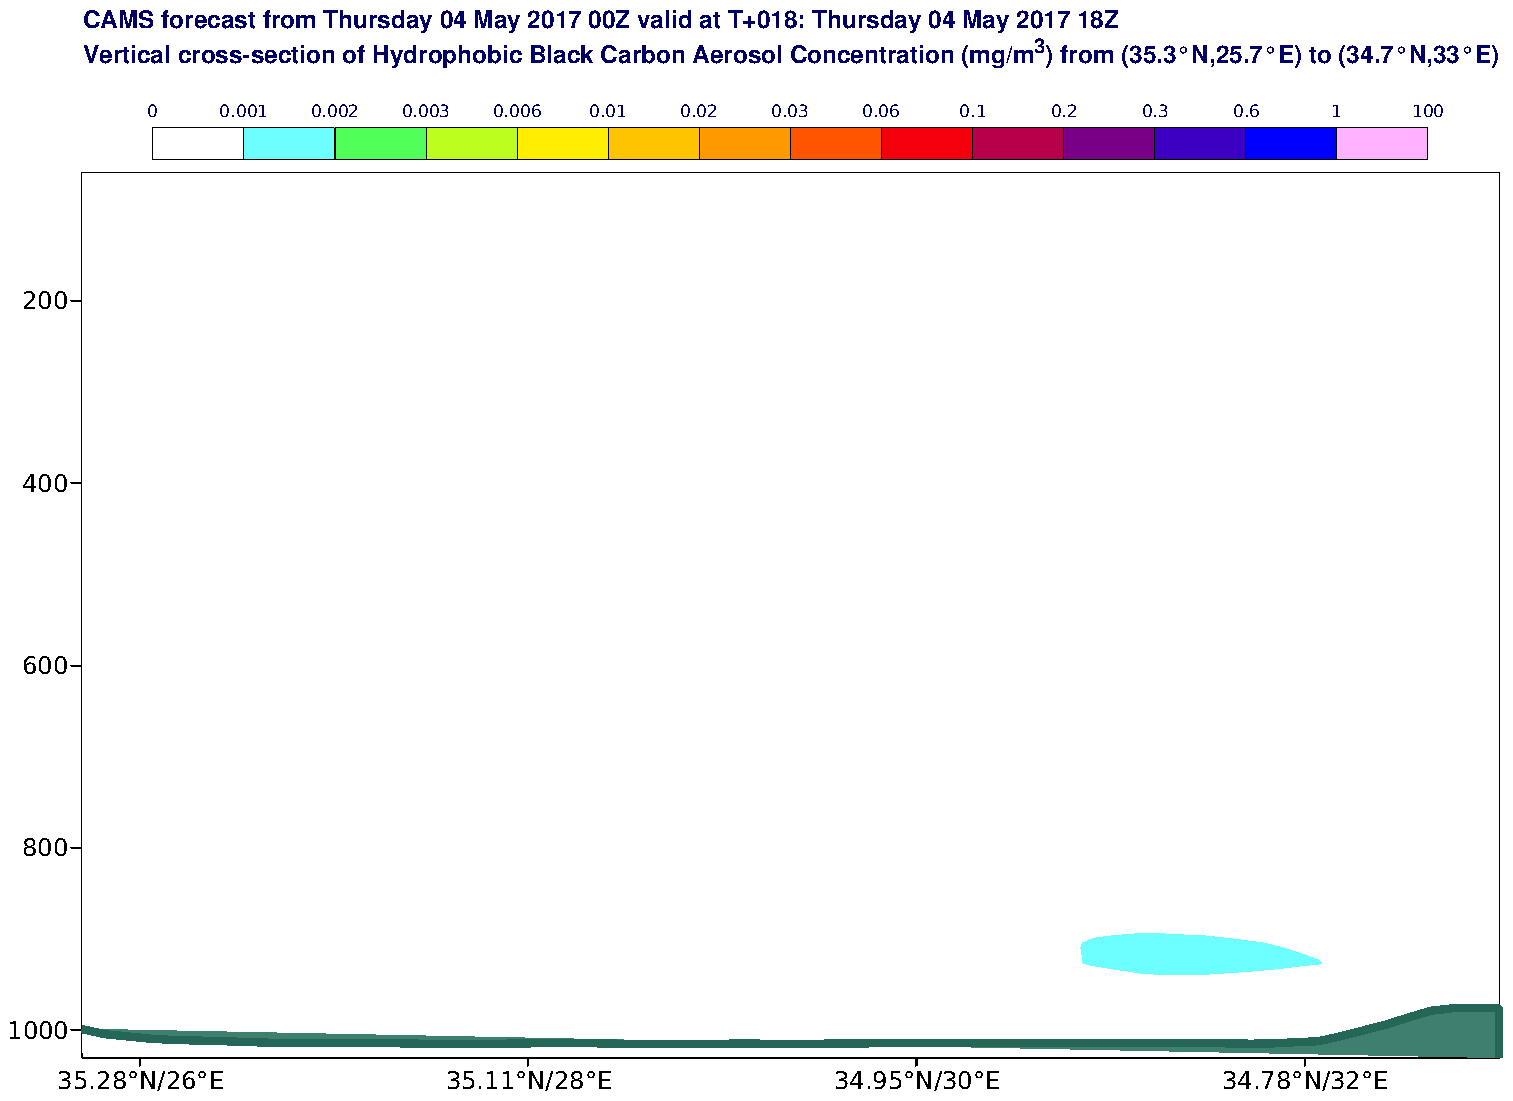 Vertical cross-section of Hydrophobic Black Carbon Aerosol Concentration (mg/m3) valid at T18 - 2017-05-04 18:00